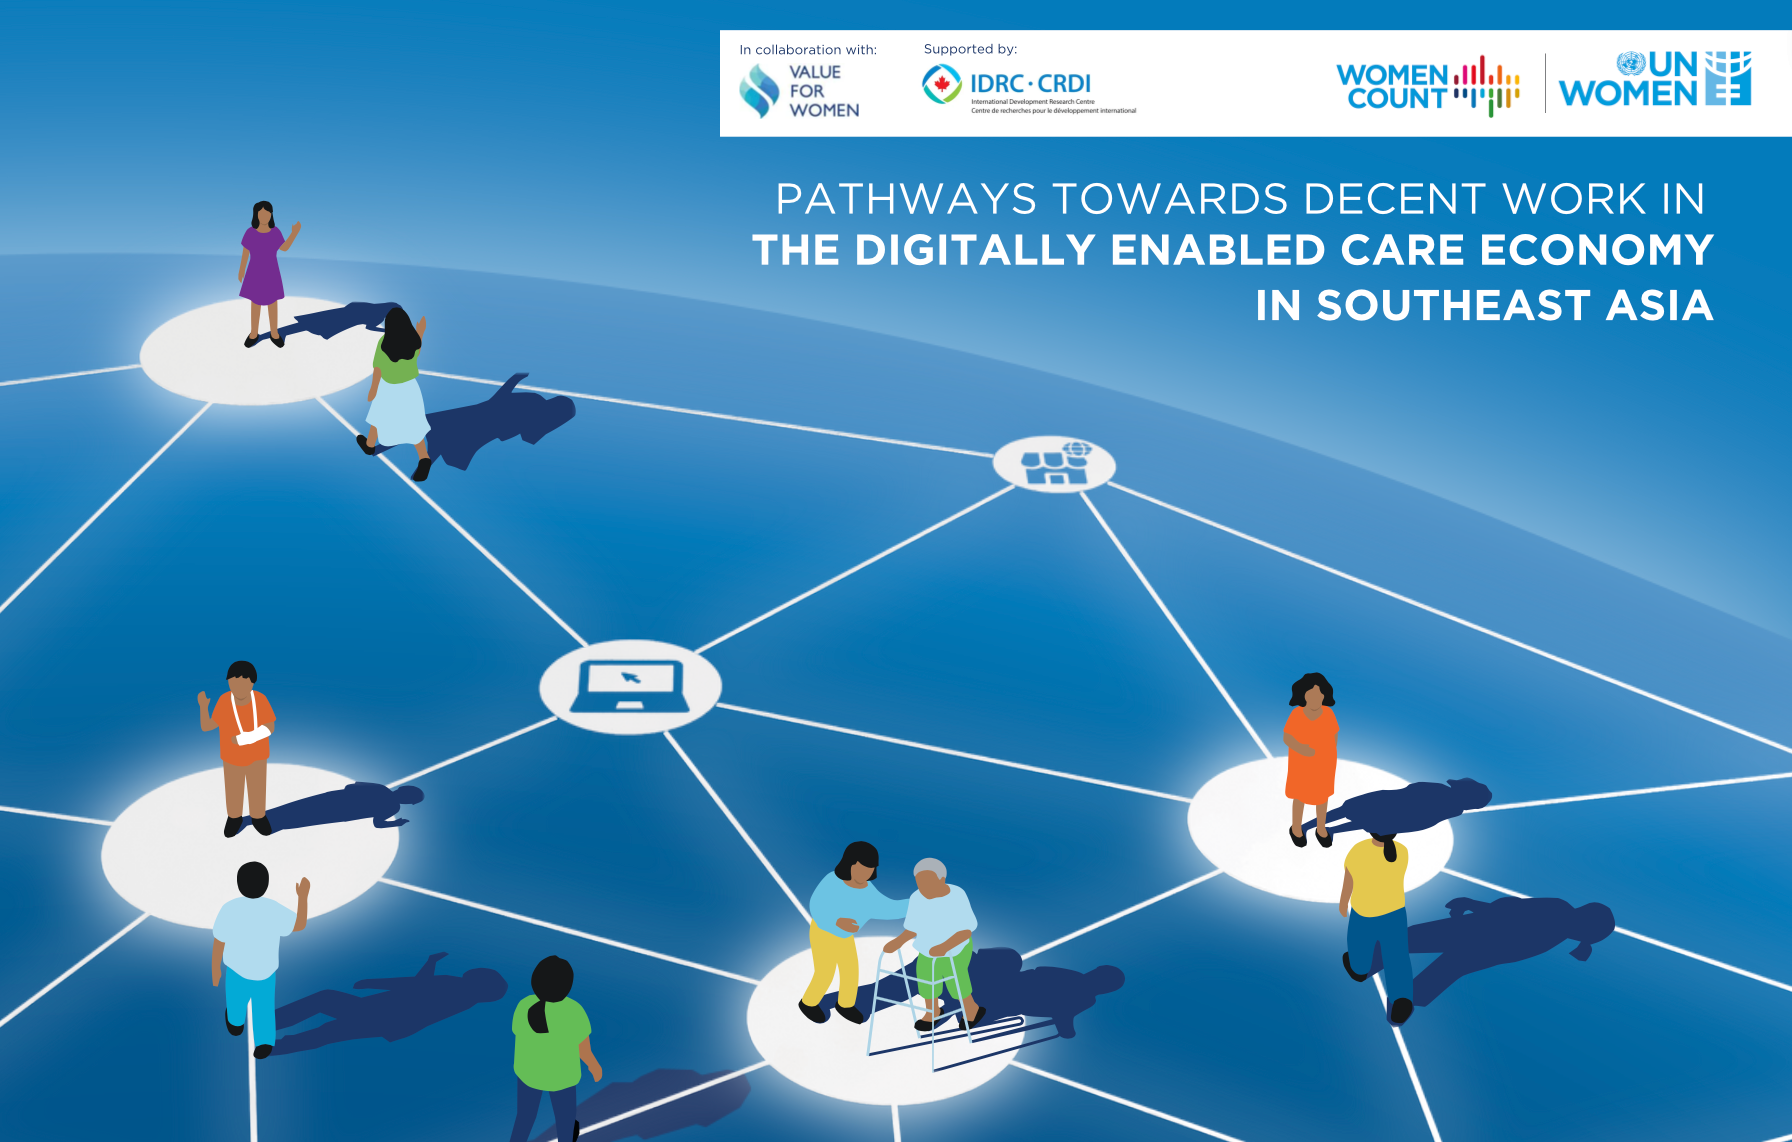 New research reveals that digitalization can set innovative pathways towards decent work in the digitally enabled care economy in South-East Asia UN Women photo